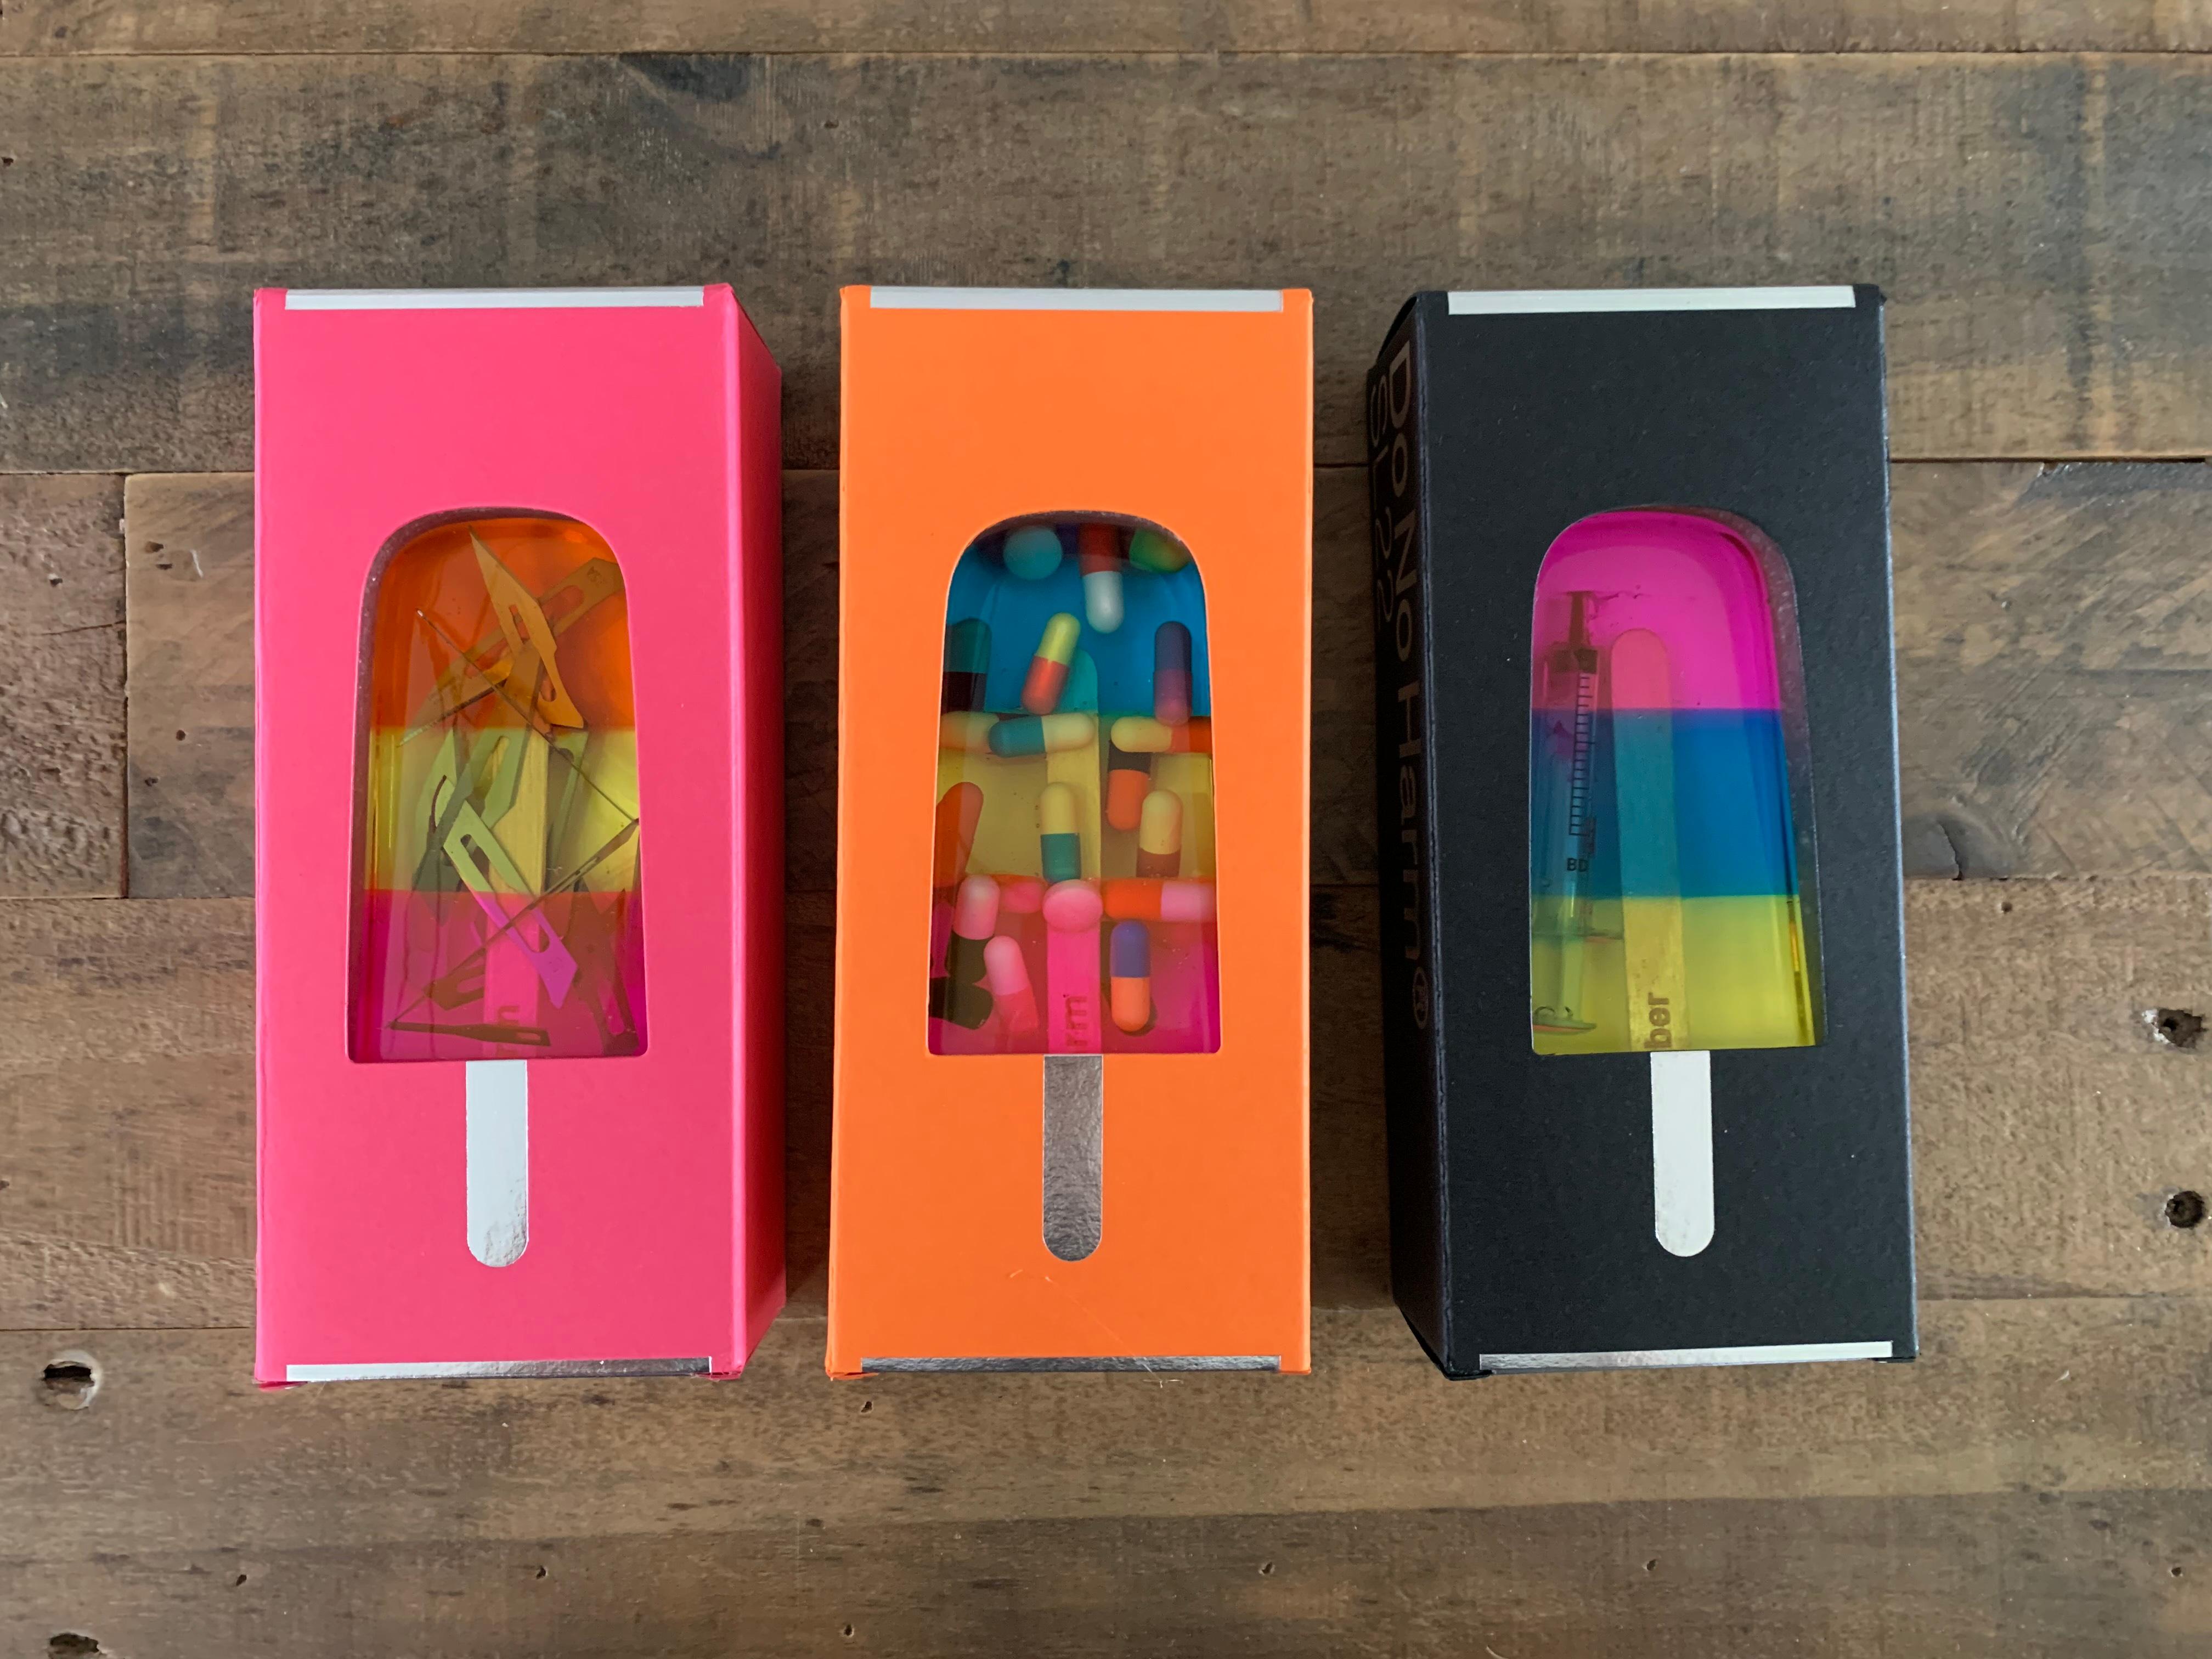 Set of 3 Handmade Resin Ice Lolly with various accruements such as a used Syringe, pills, and razor blades
Each Presented in a Custom Box.
2021
Unnumbered series of lollies. Each come with a Certificate of Authenticity.
We believe this would look